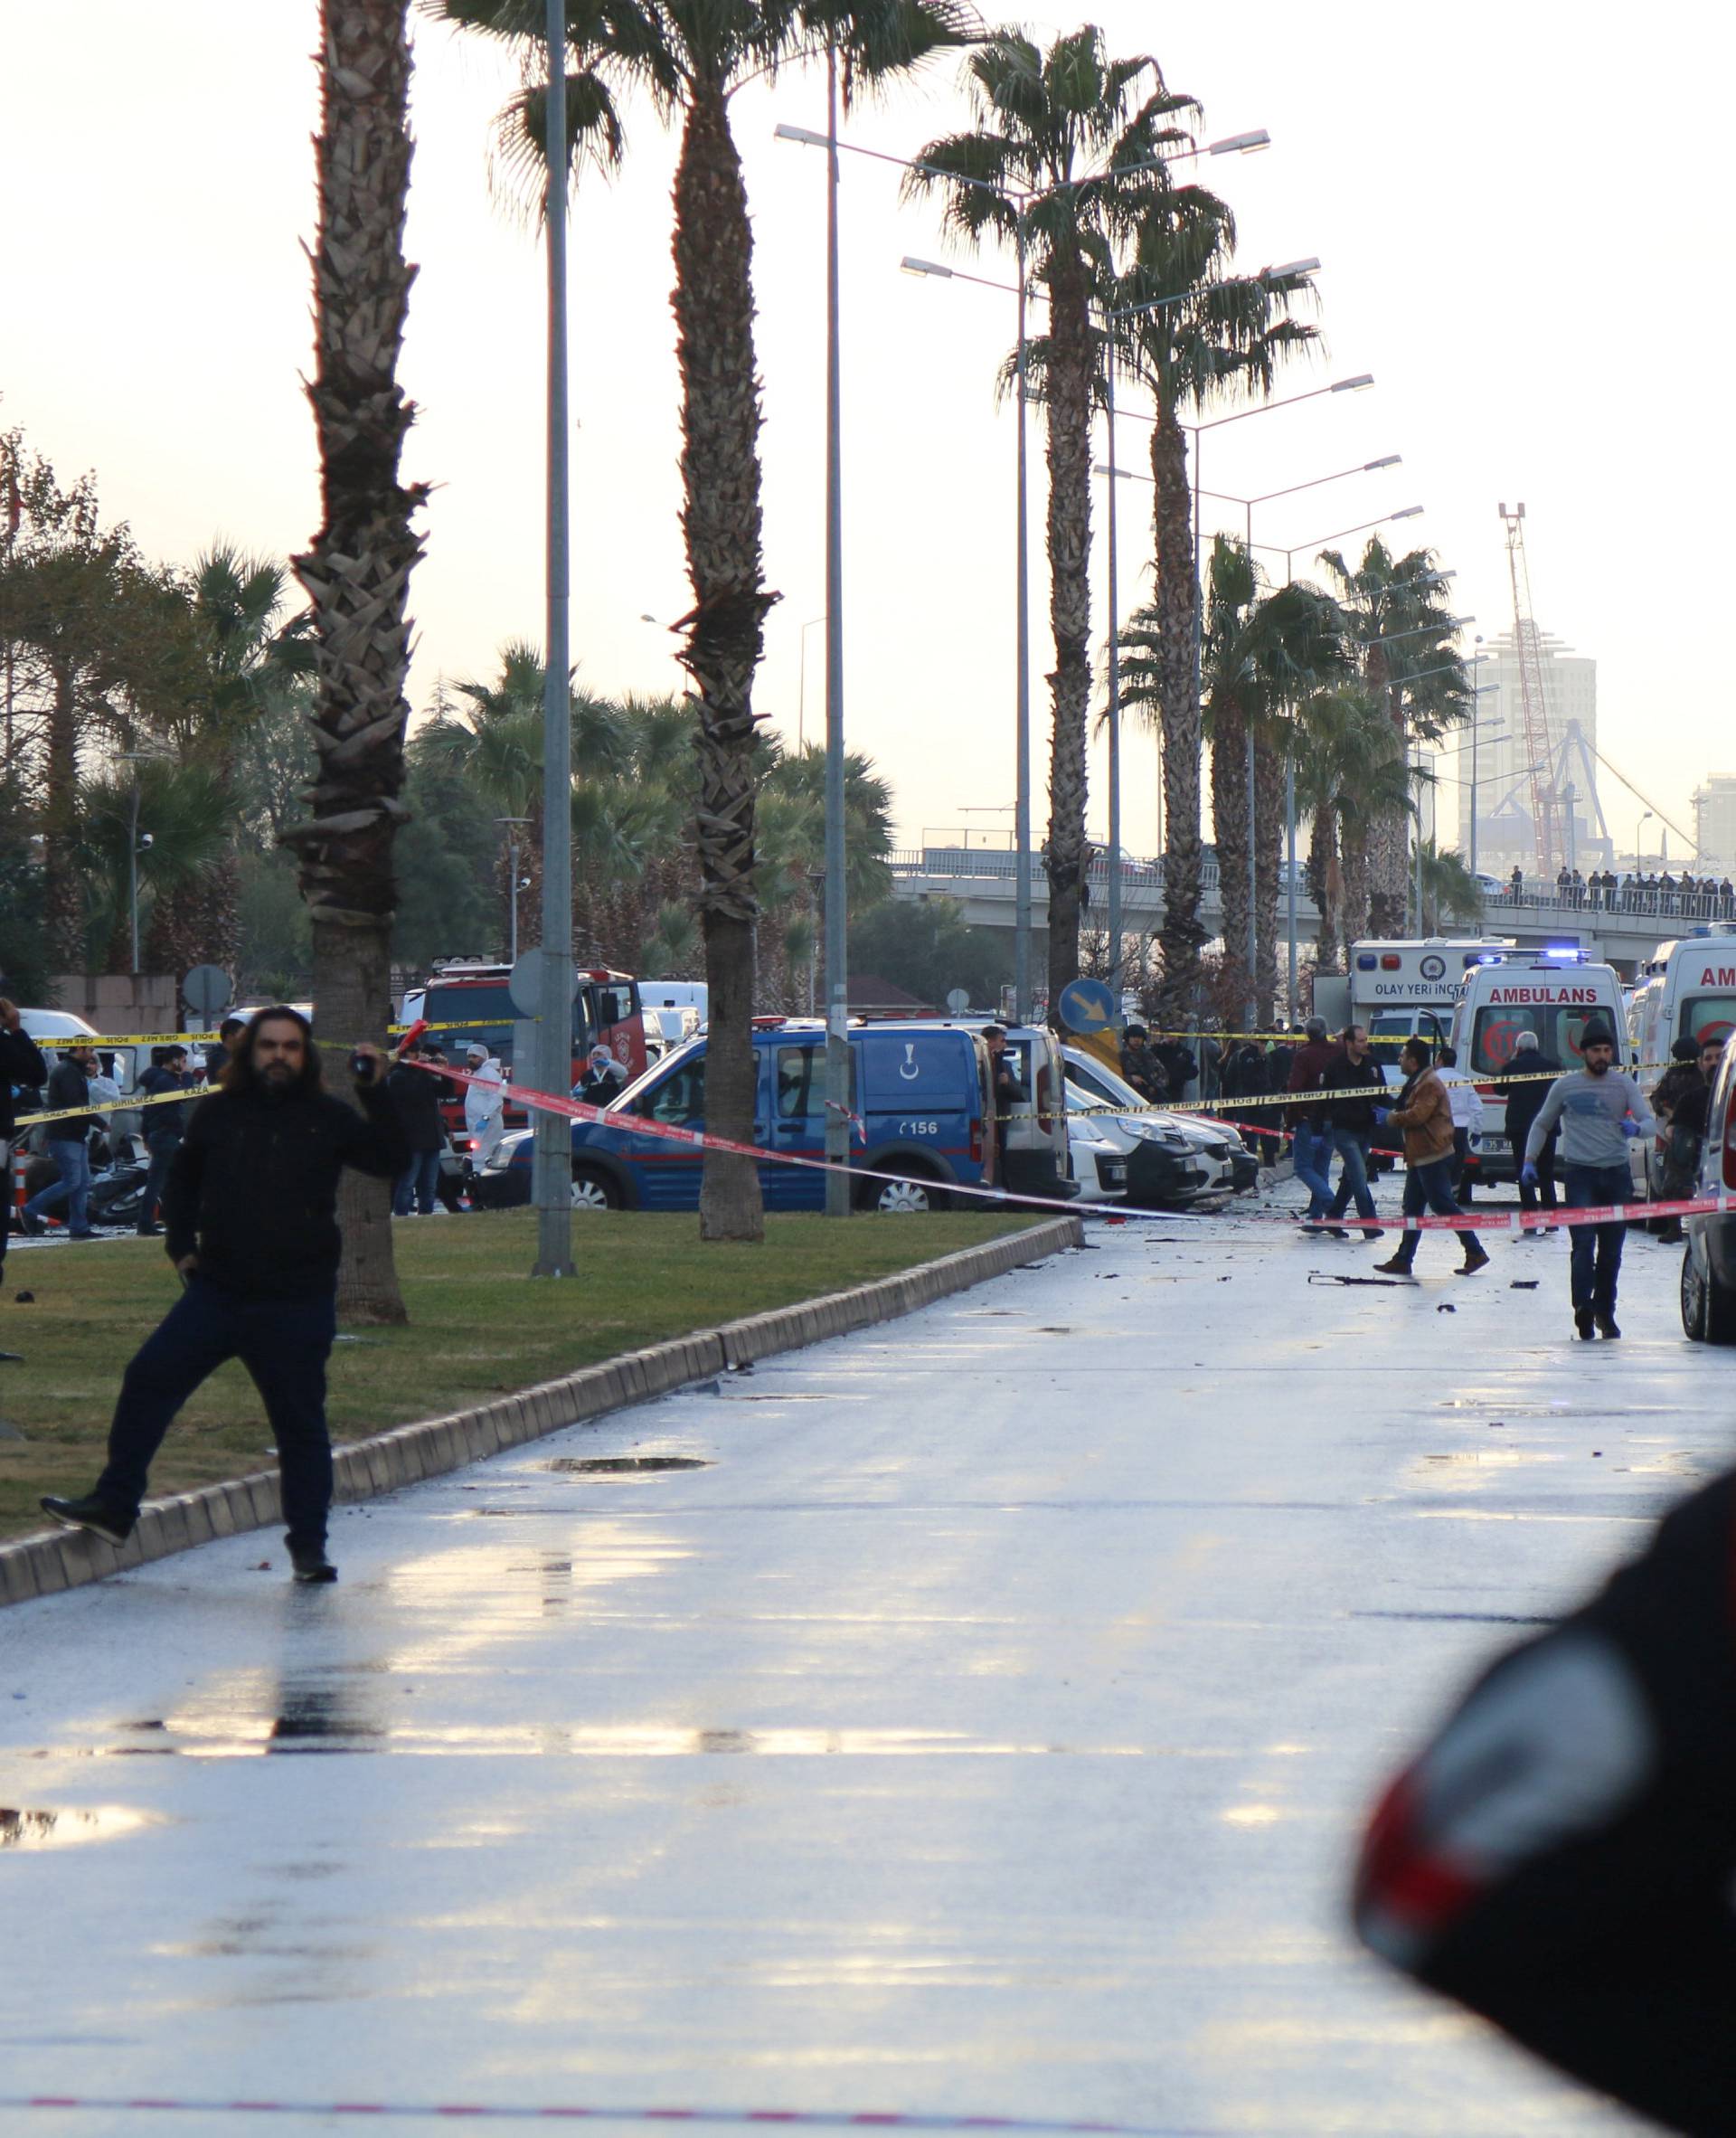 Police secure the area after an explosion outside a courthouse in Izmir